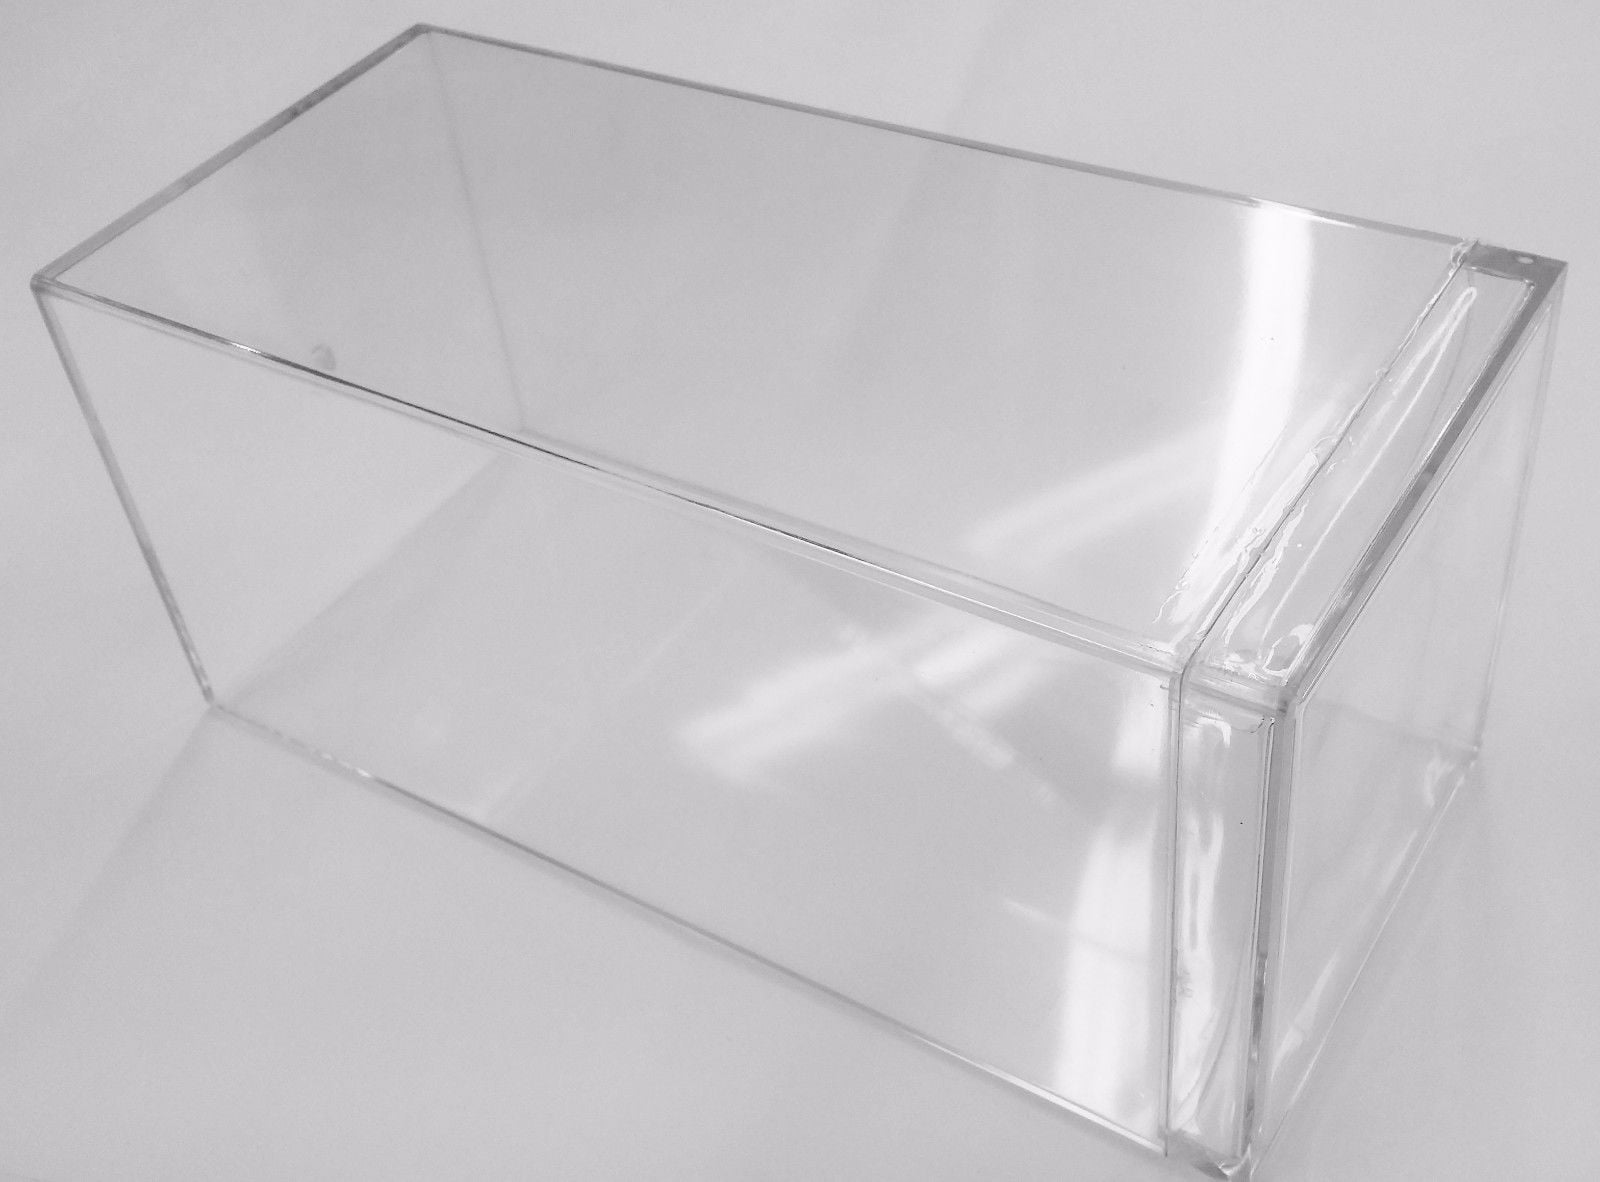 Acrylic Model Car Display Case Large Clear Plastic Box Dust Proof Step 9" x 5" 